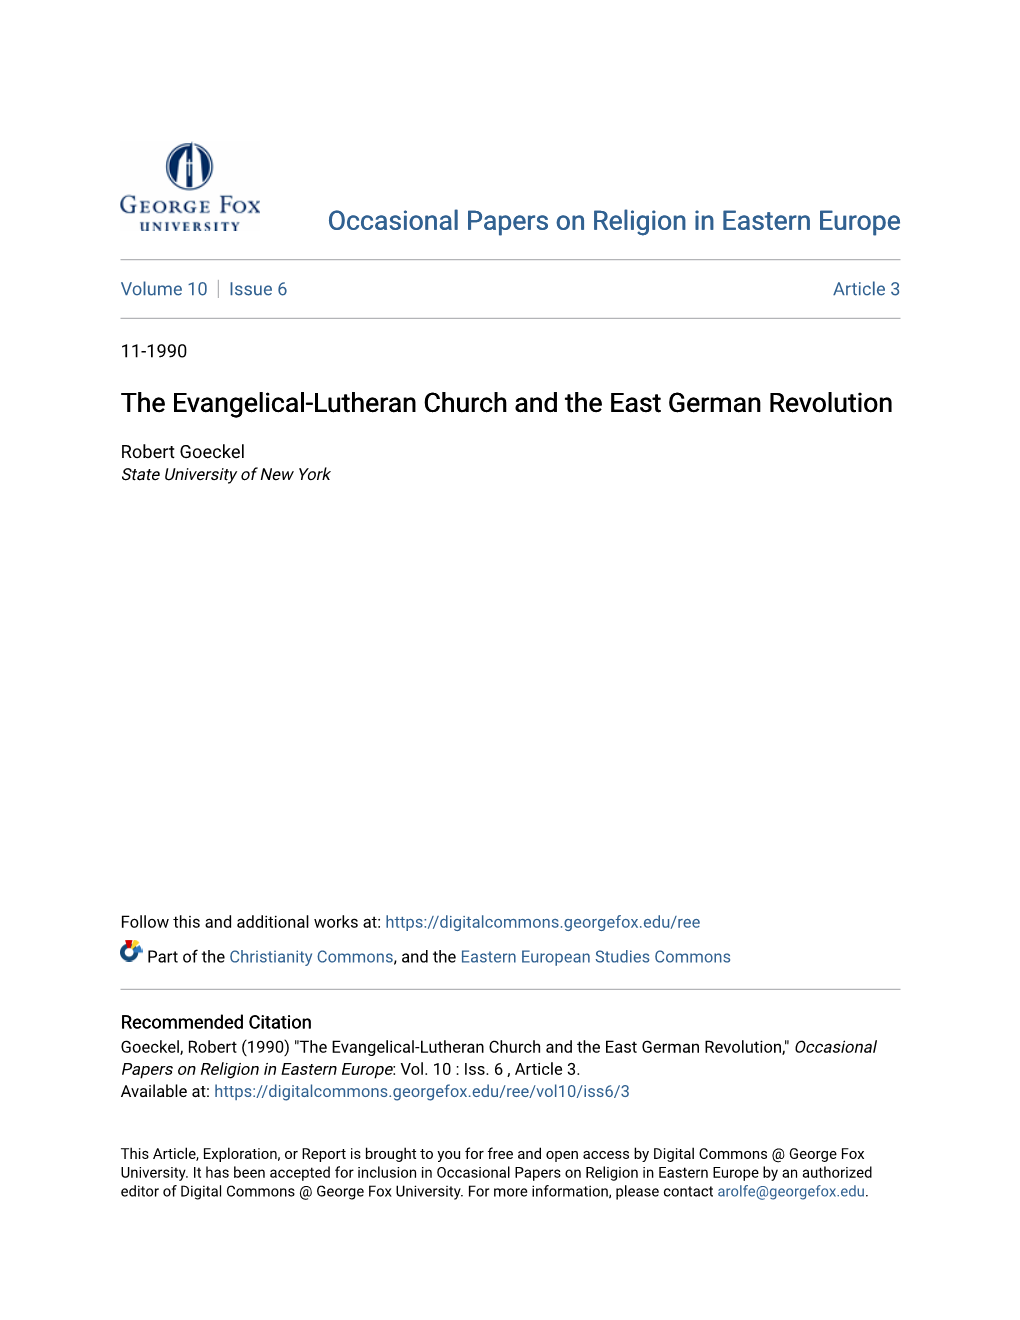 The Evangelical-Lutheran Church and the East German Revolution